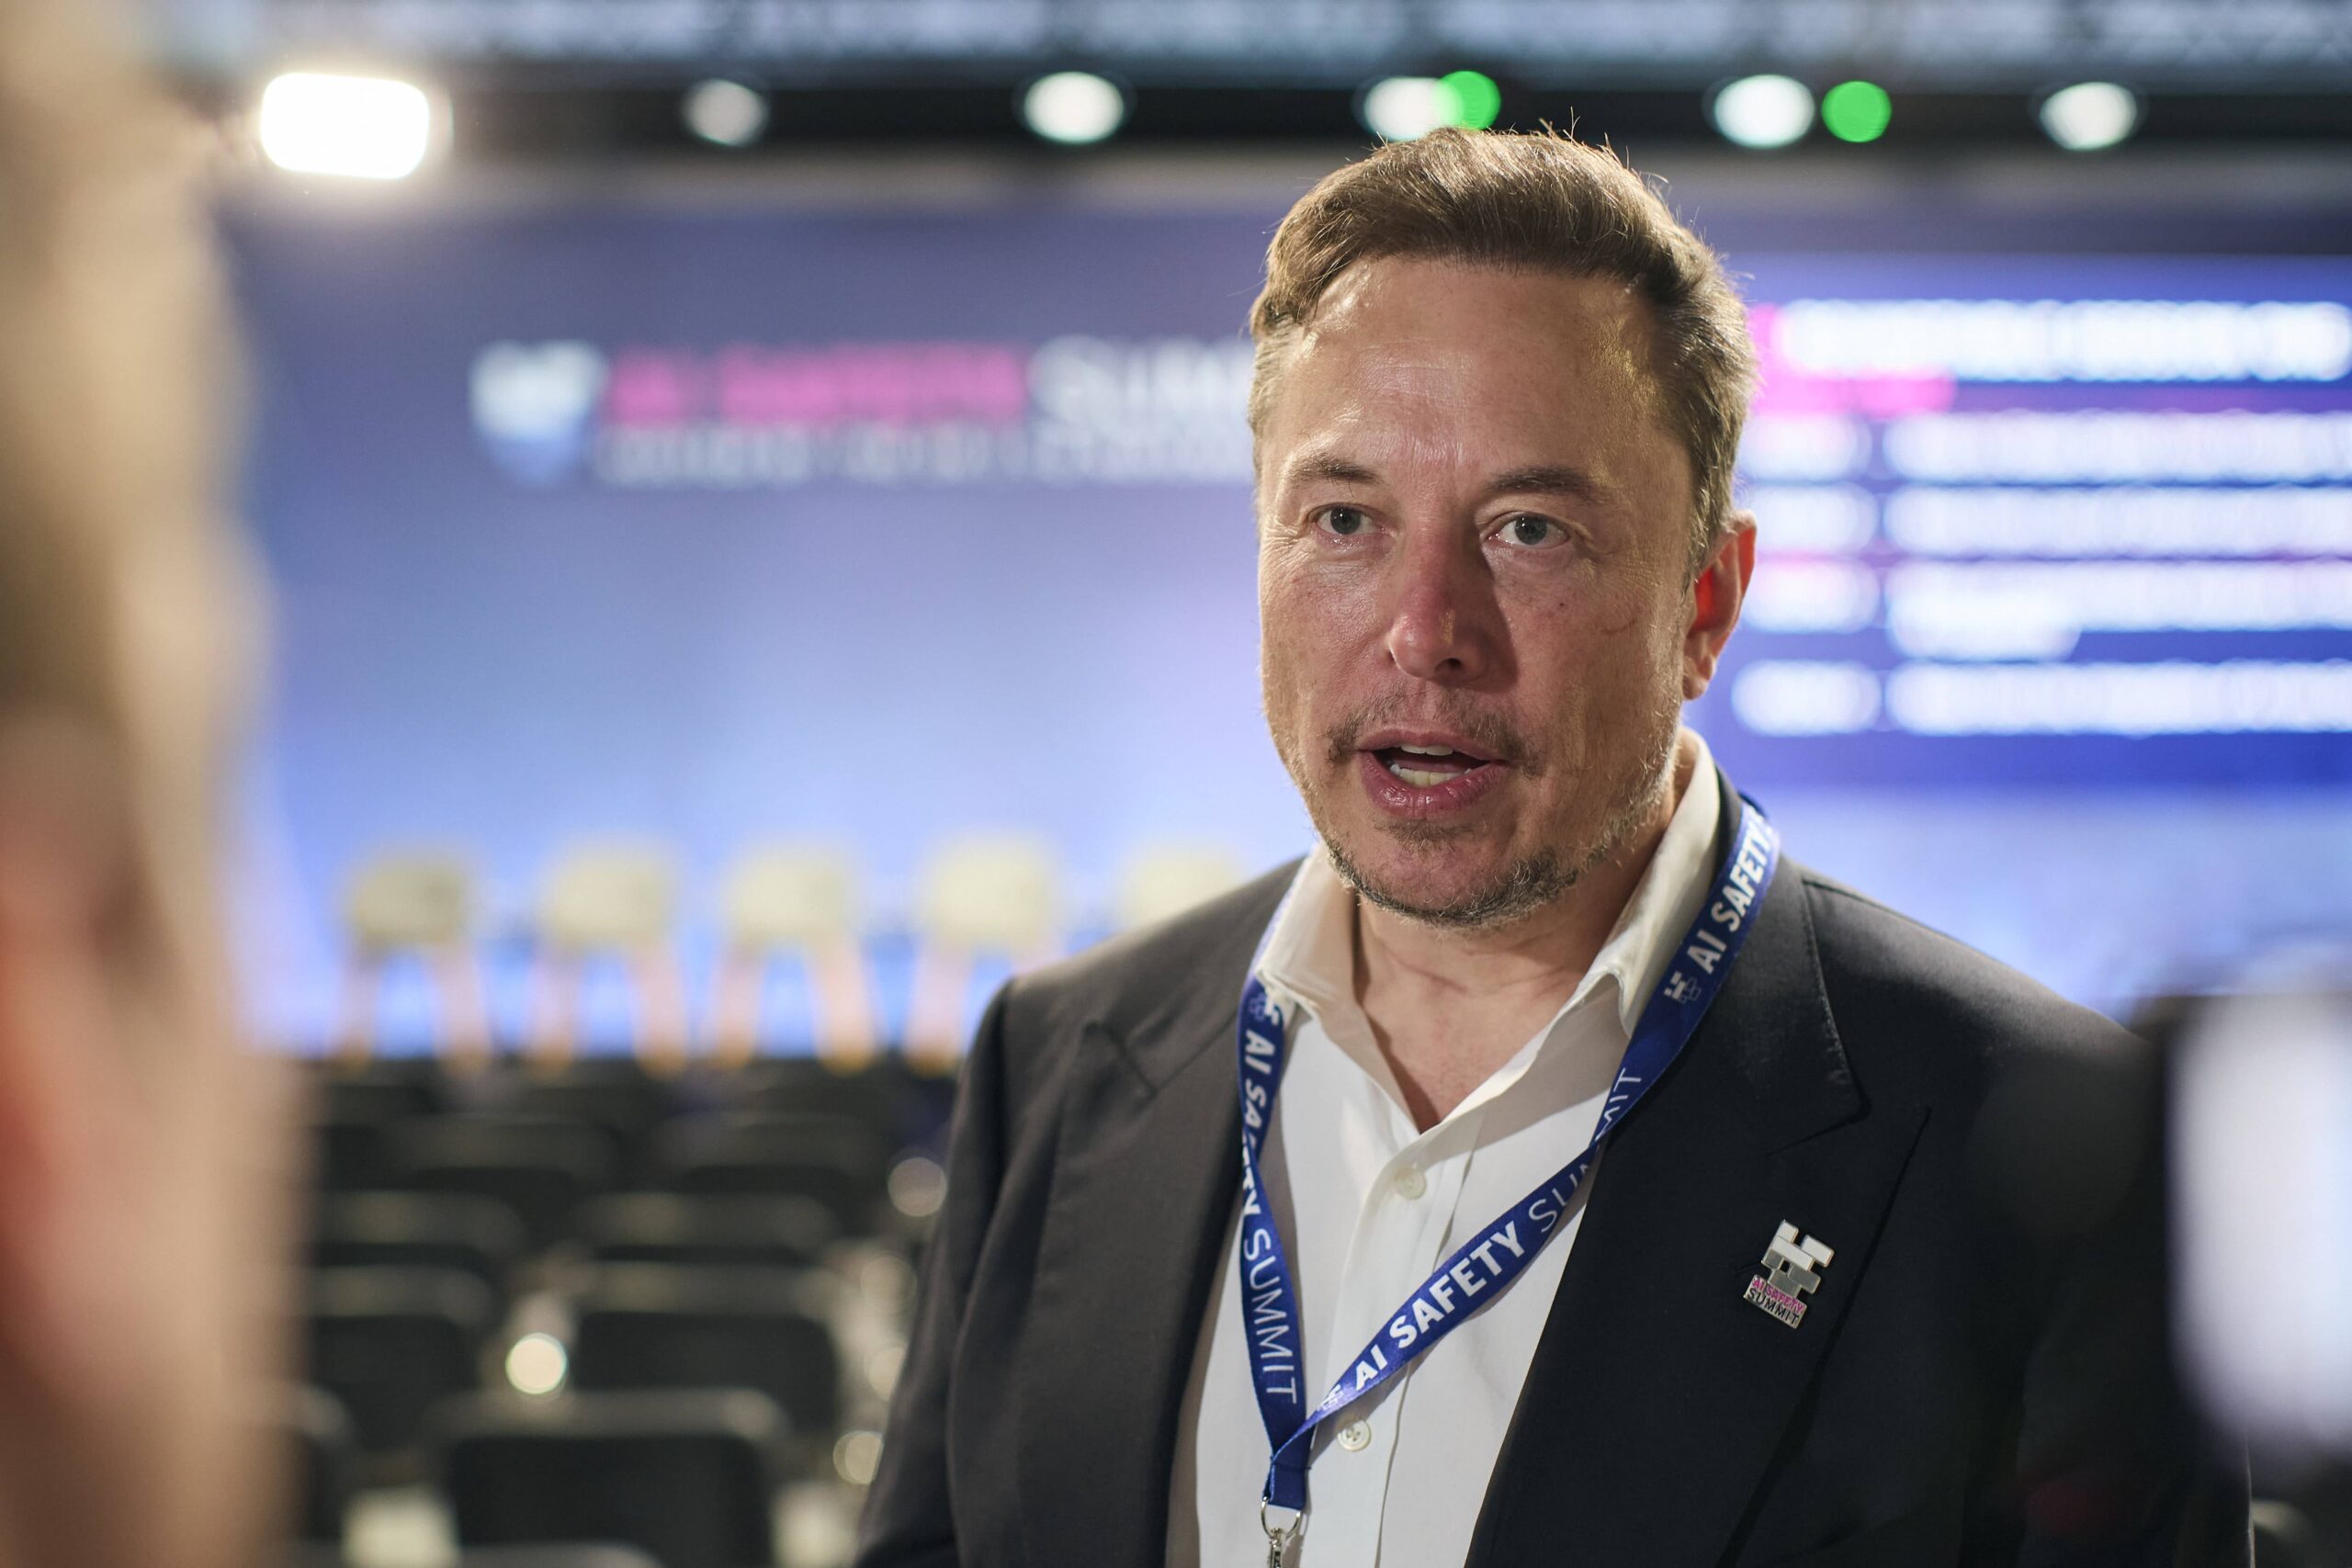 Elon Musk at the AI Safety Summit